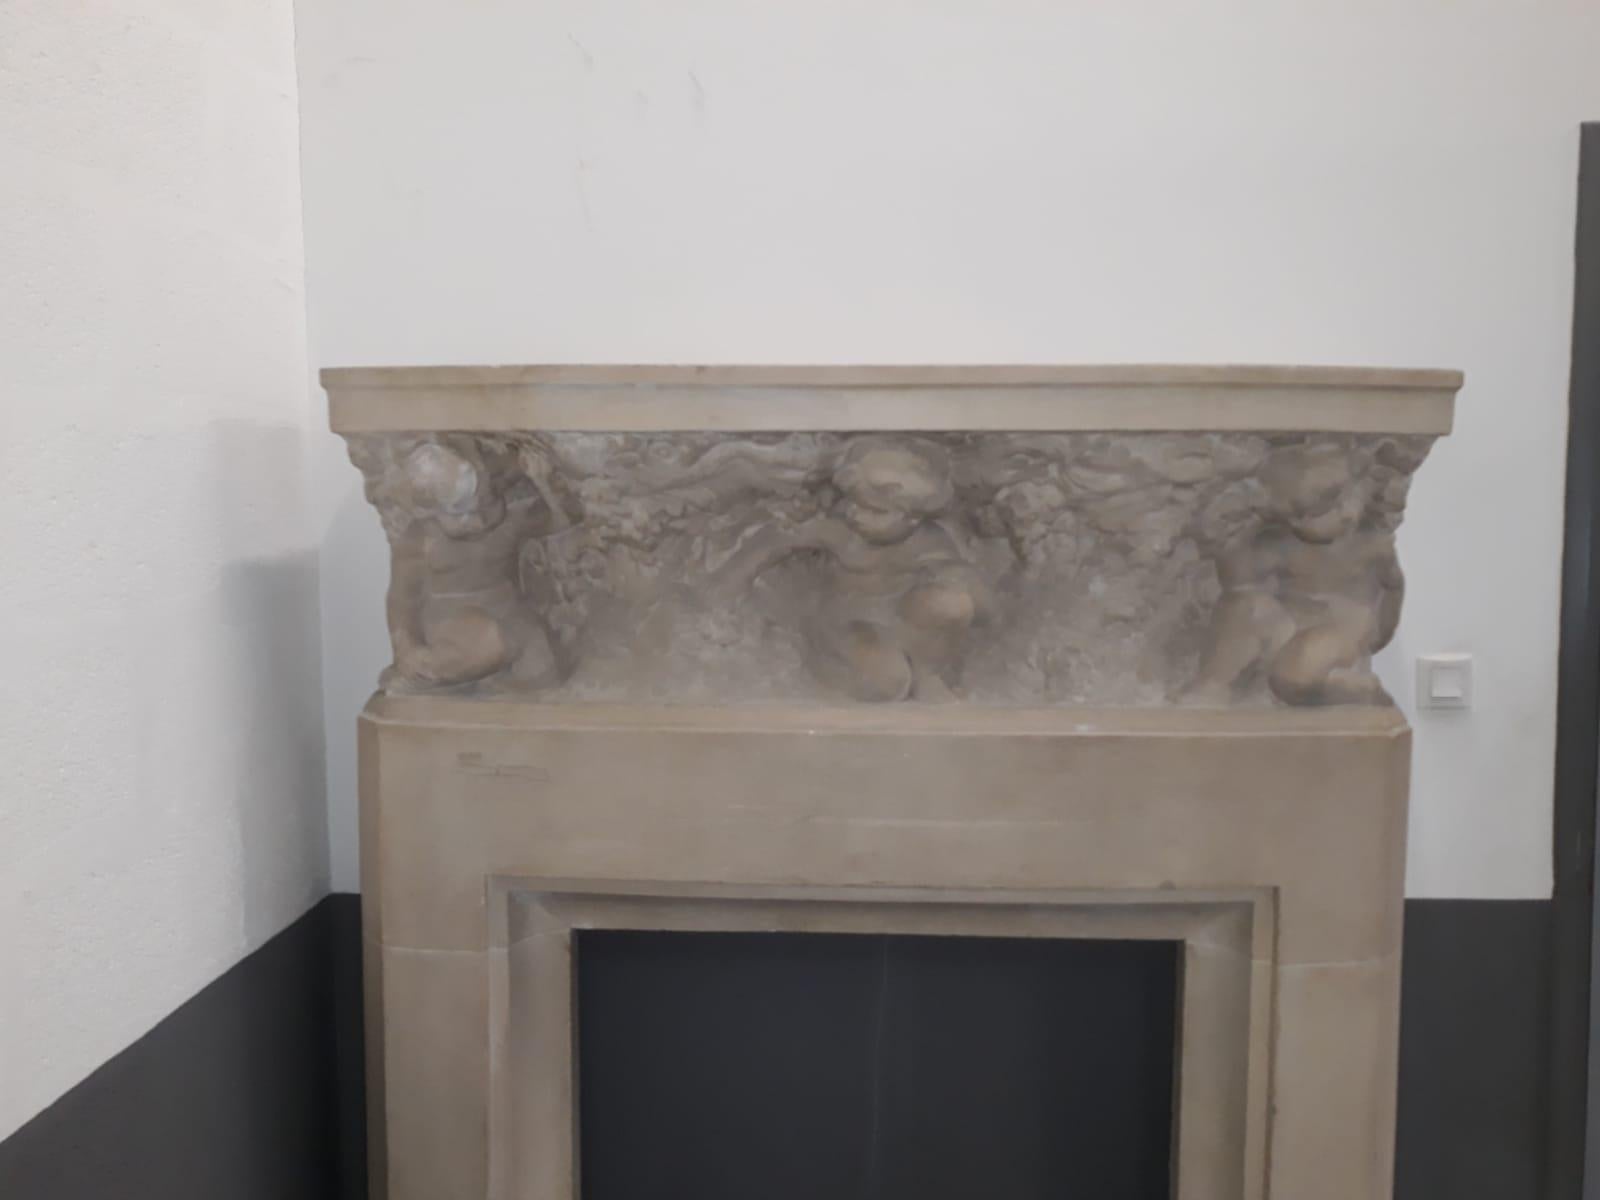 Rare Art Deco stone fireplace, neoclassic style, circa 1940
(Attributed)  to Paul Hagemans ( 1884-1959)
Provenance: Hotel Particulier in Paris.